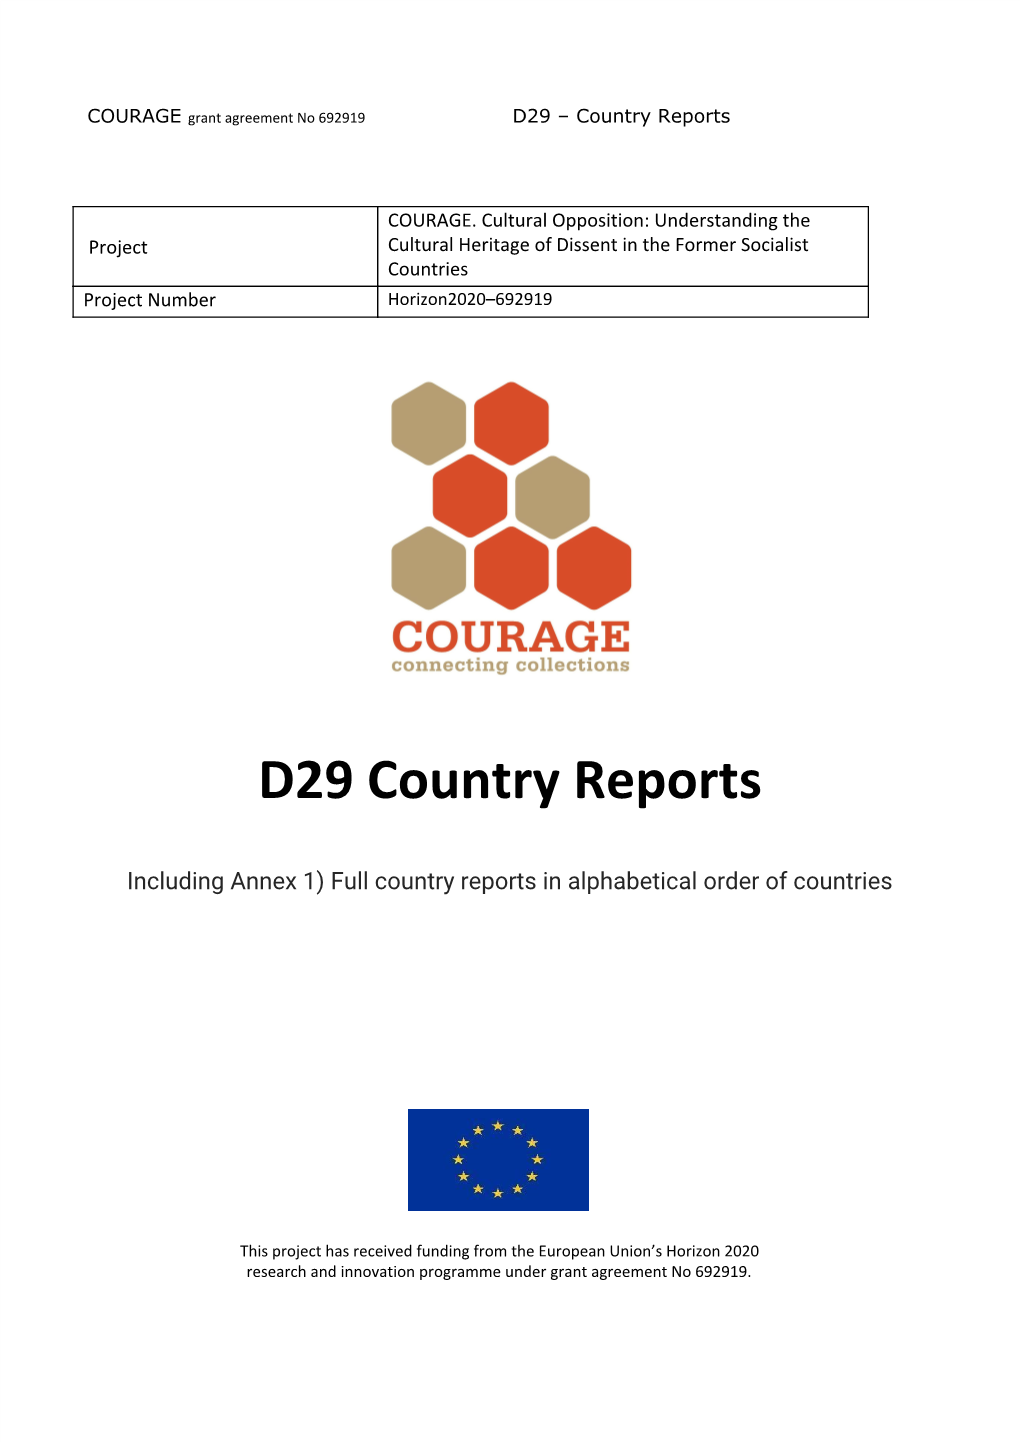 D29 Country Reports